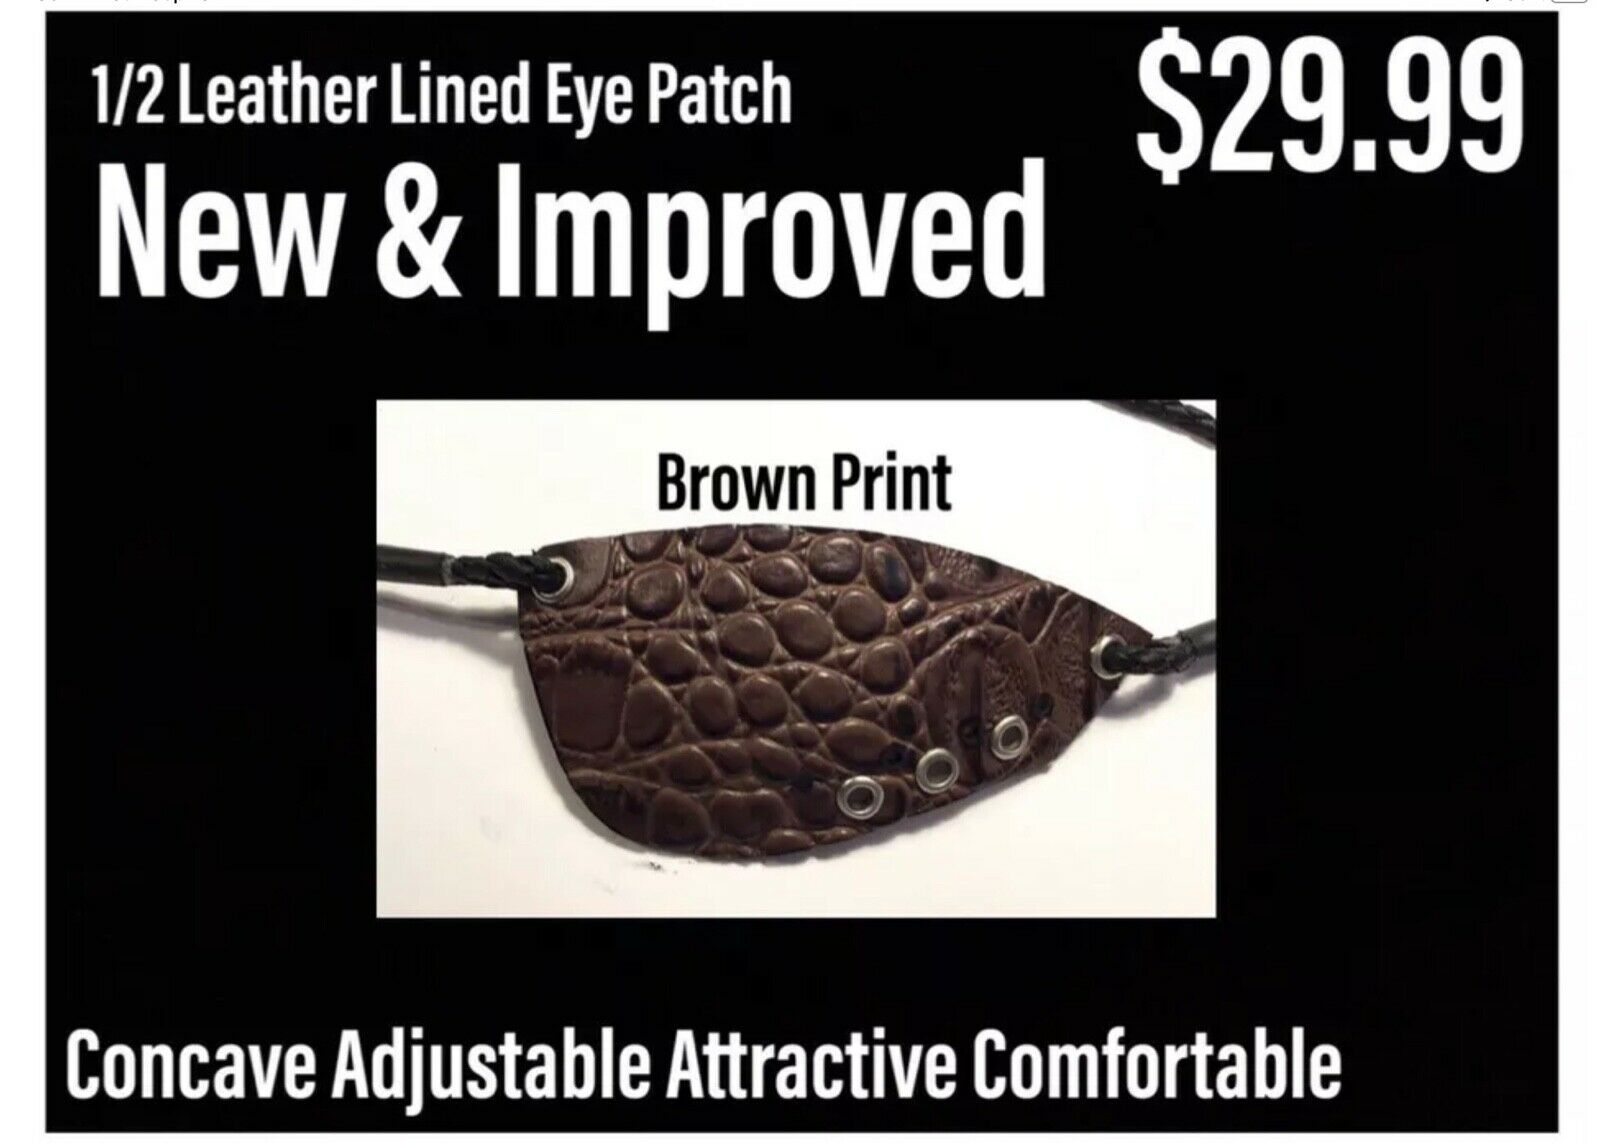 Brown Print - Leather Lined Patch At Eye Patches R Us - C.o.a. - Crenshaw Cut